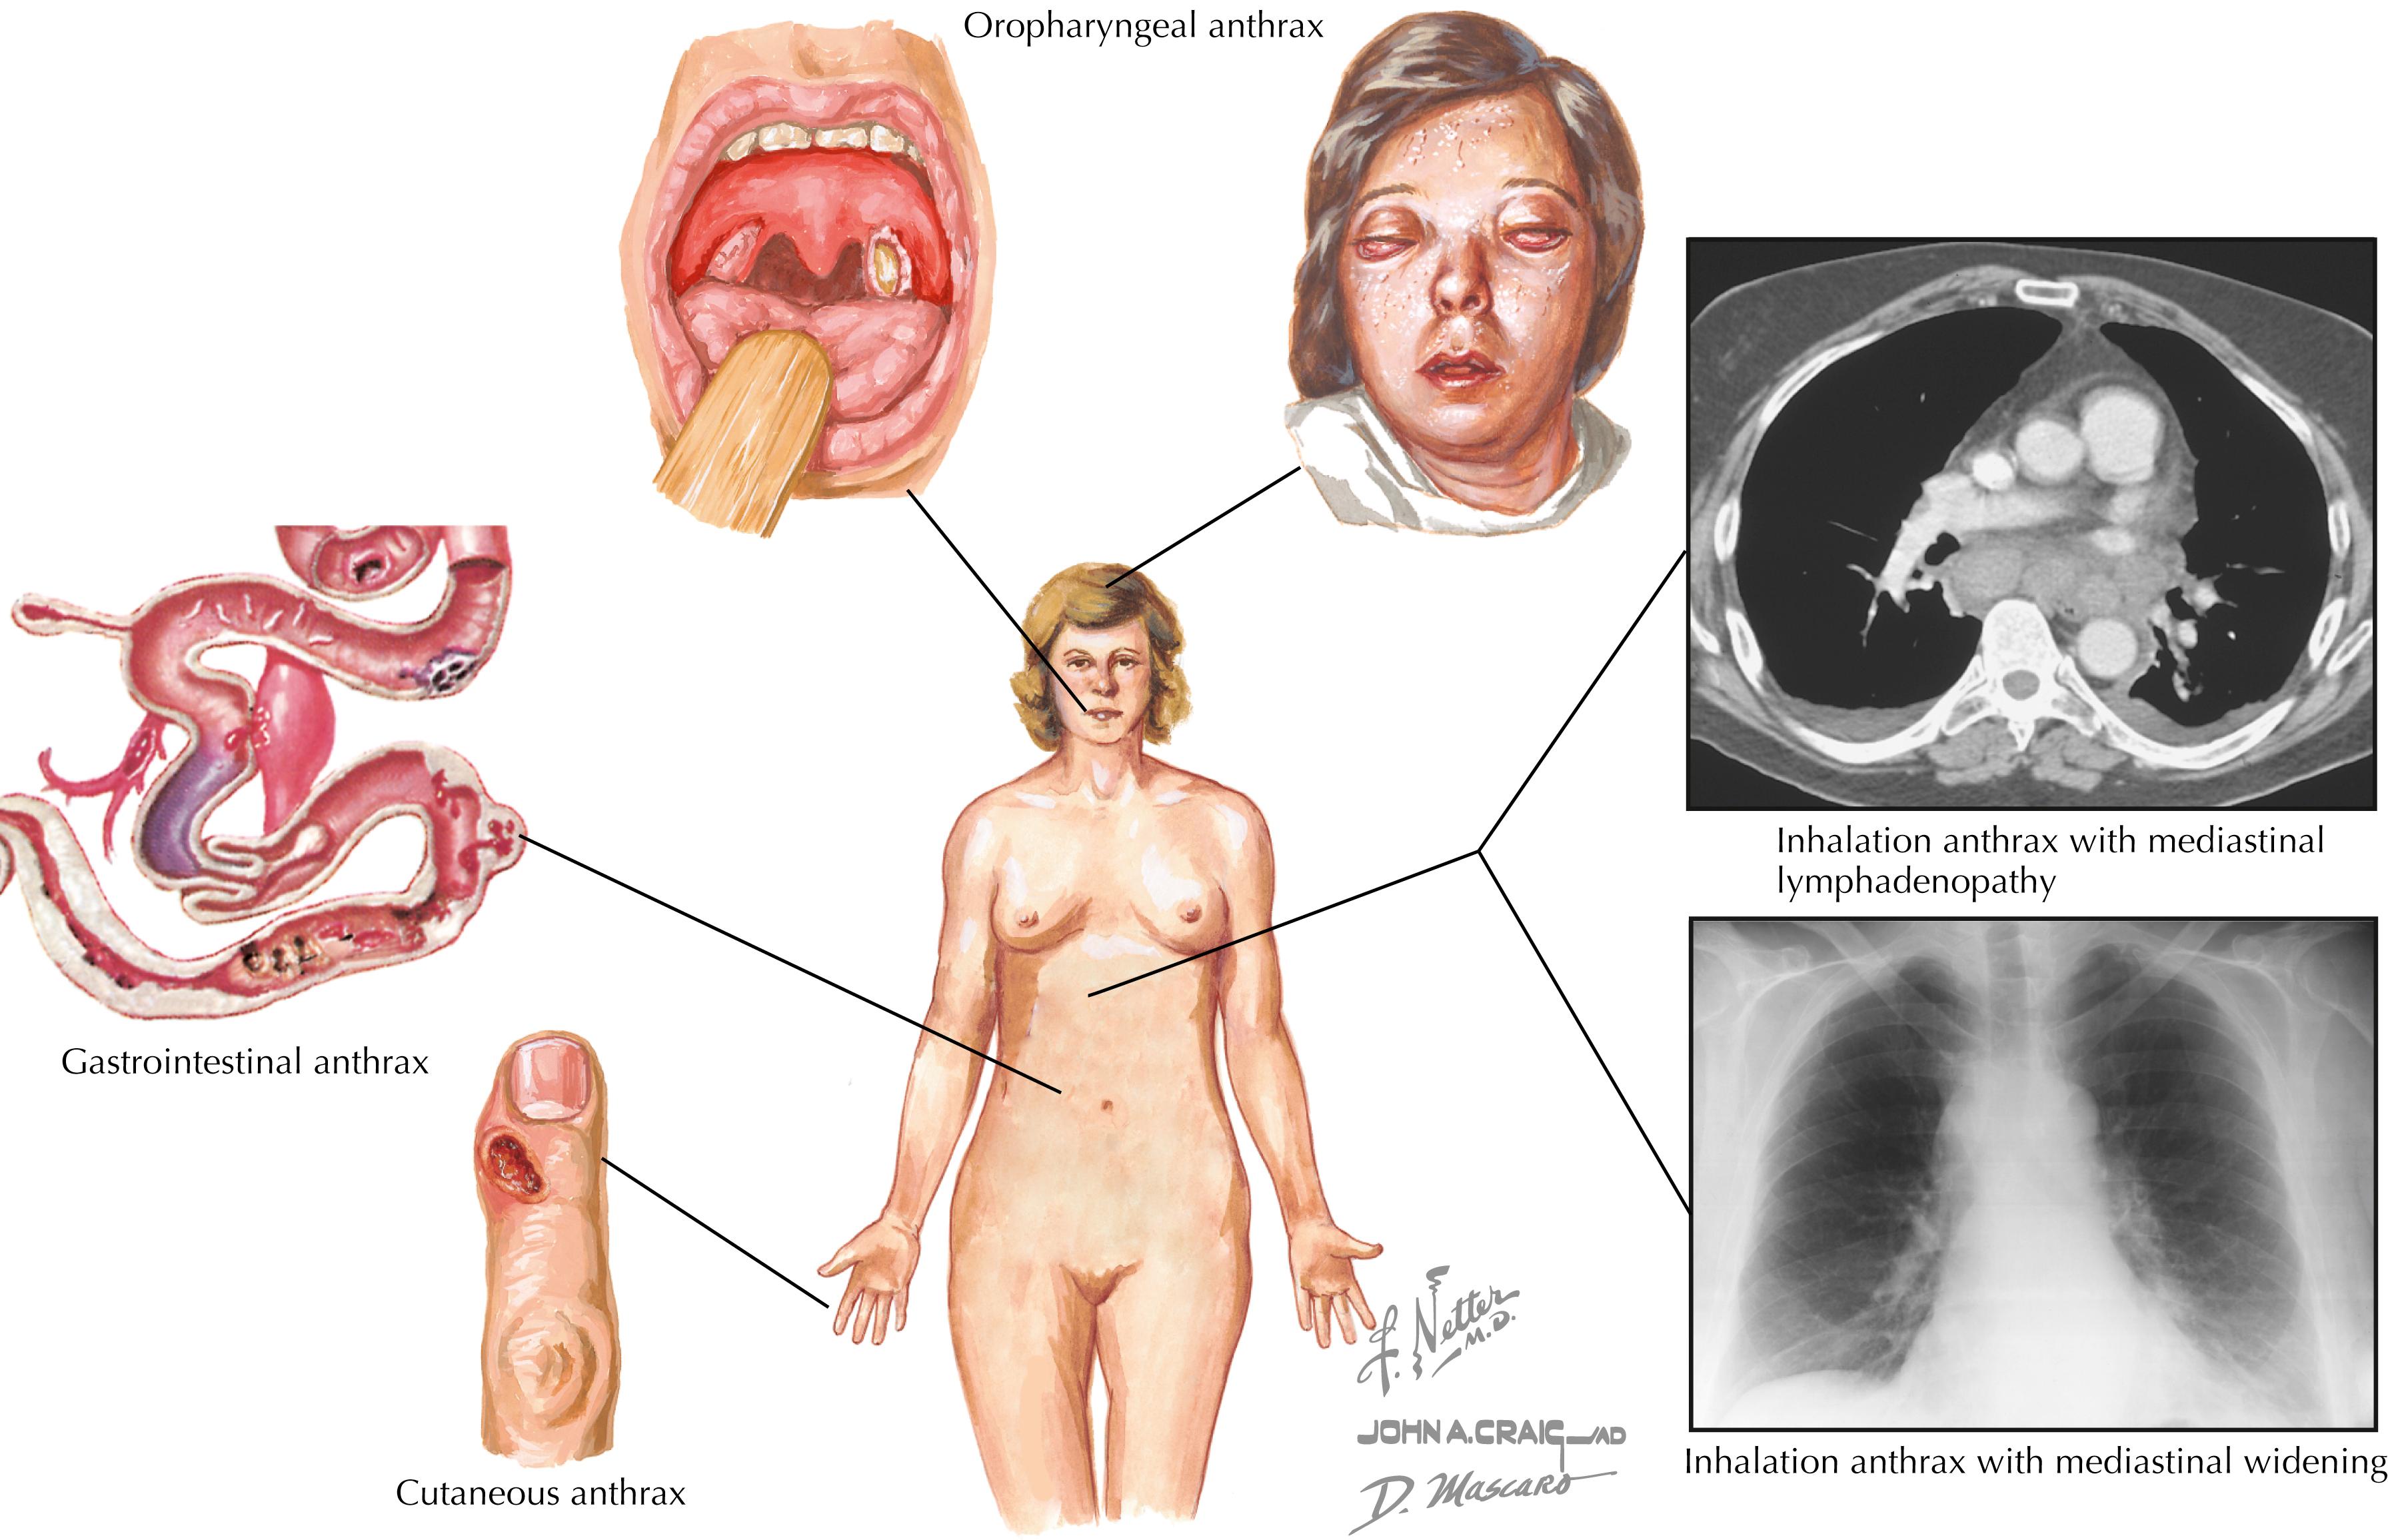 Fig. 90.4, Bacillus anthracis causes three major clinical syndromes to include cutaneous, oropharyngeal-gastrointestinal, and inhalational forms. Cutaneous anthrax is most common with a self-limited edematous ulcer forming on the skin of areas in contact with infectious spores. Oral and GI anthrax result from consuming contaminated animal products, most commonly meat, and feature ulcerative disease of the oropharynx and GI tract. Inhalation anthrax is the most severe form, and most commonly associated with deliberate biological attack through inhaling anthrax spores. The inhalational form begins with protean systemic symptoms, which rapidly progress to mediastinitis with widening seen on imaging studies, septic shock, meningitis, and death if untreated.